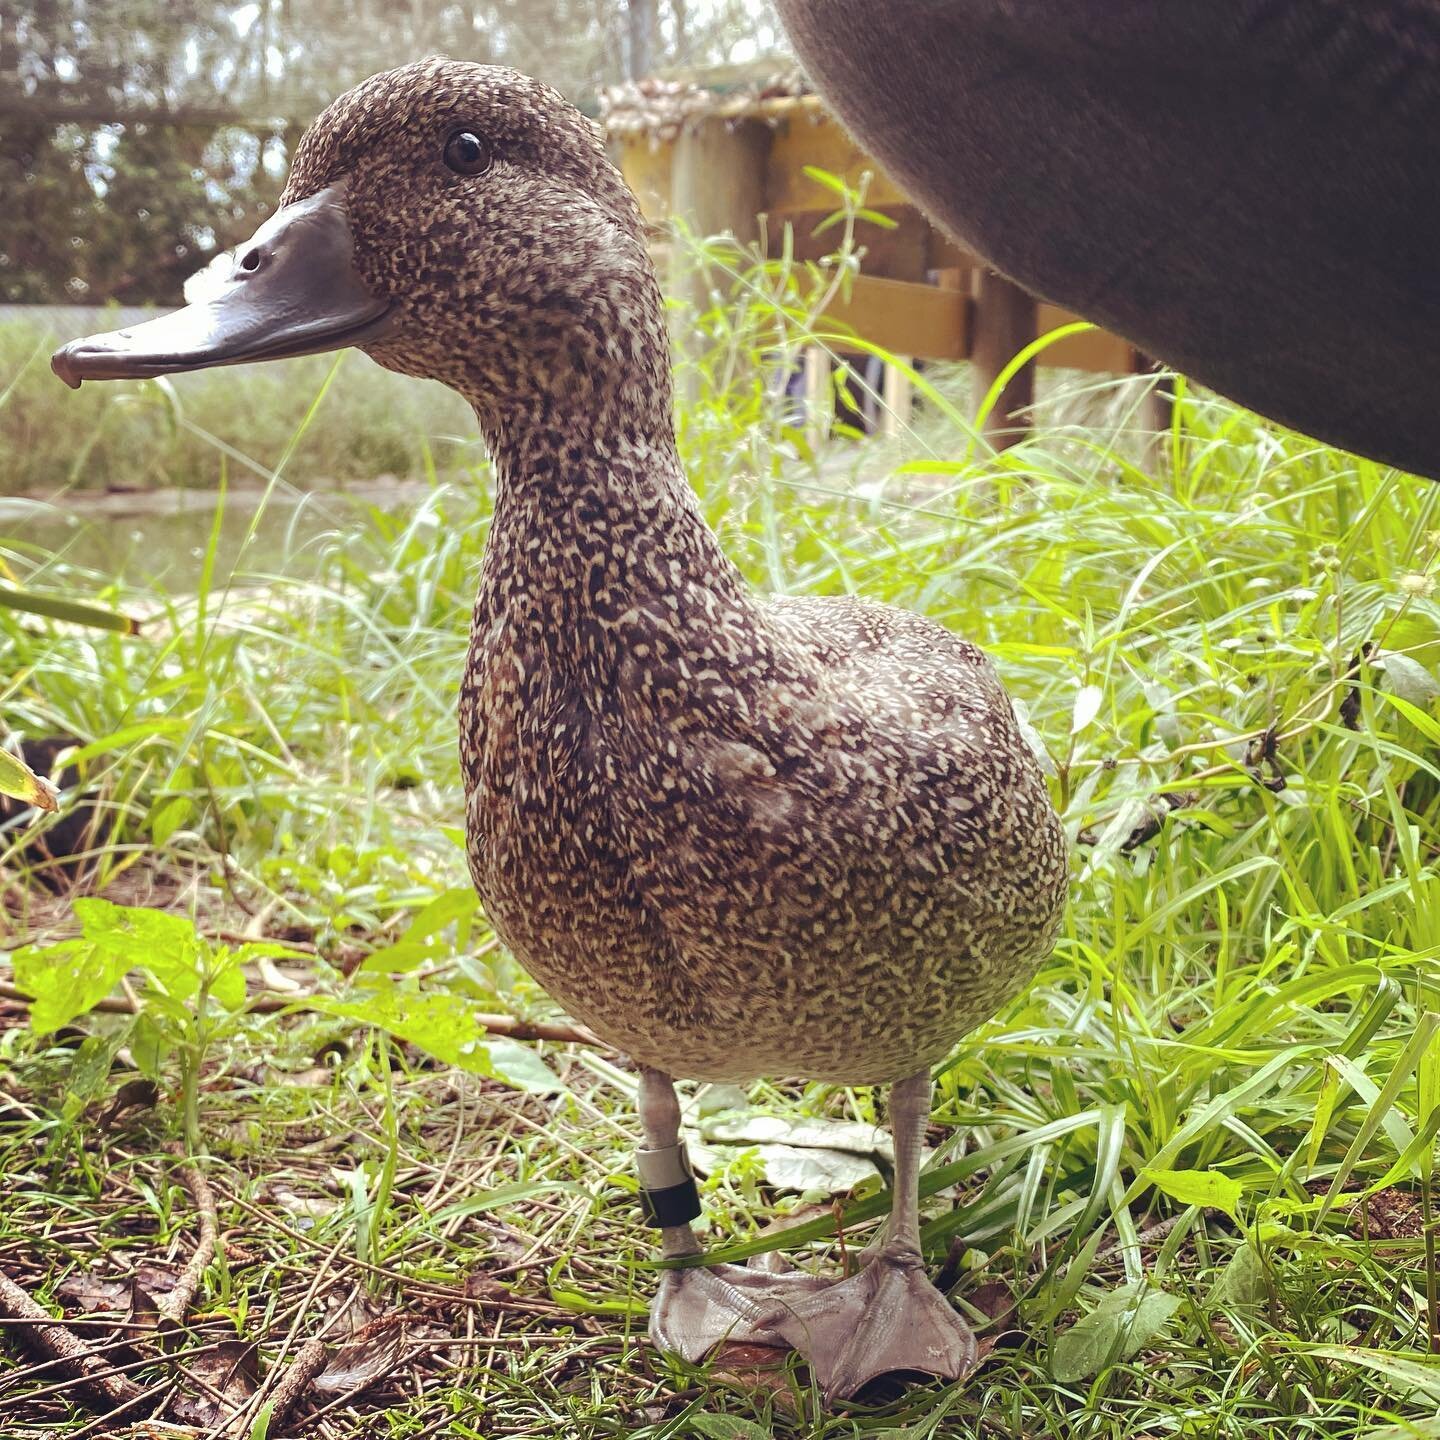 A nice morning spent with the freckled ducks @hunterwetlands developing some content with @megalodonprojects for a new interpretive sign. 

Showcasing the history of the HWC breeding program of this rare waterfowl. 

The most exciting thing is that t